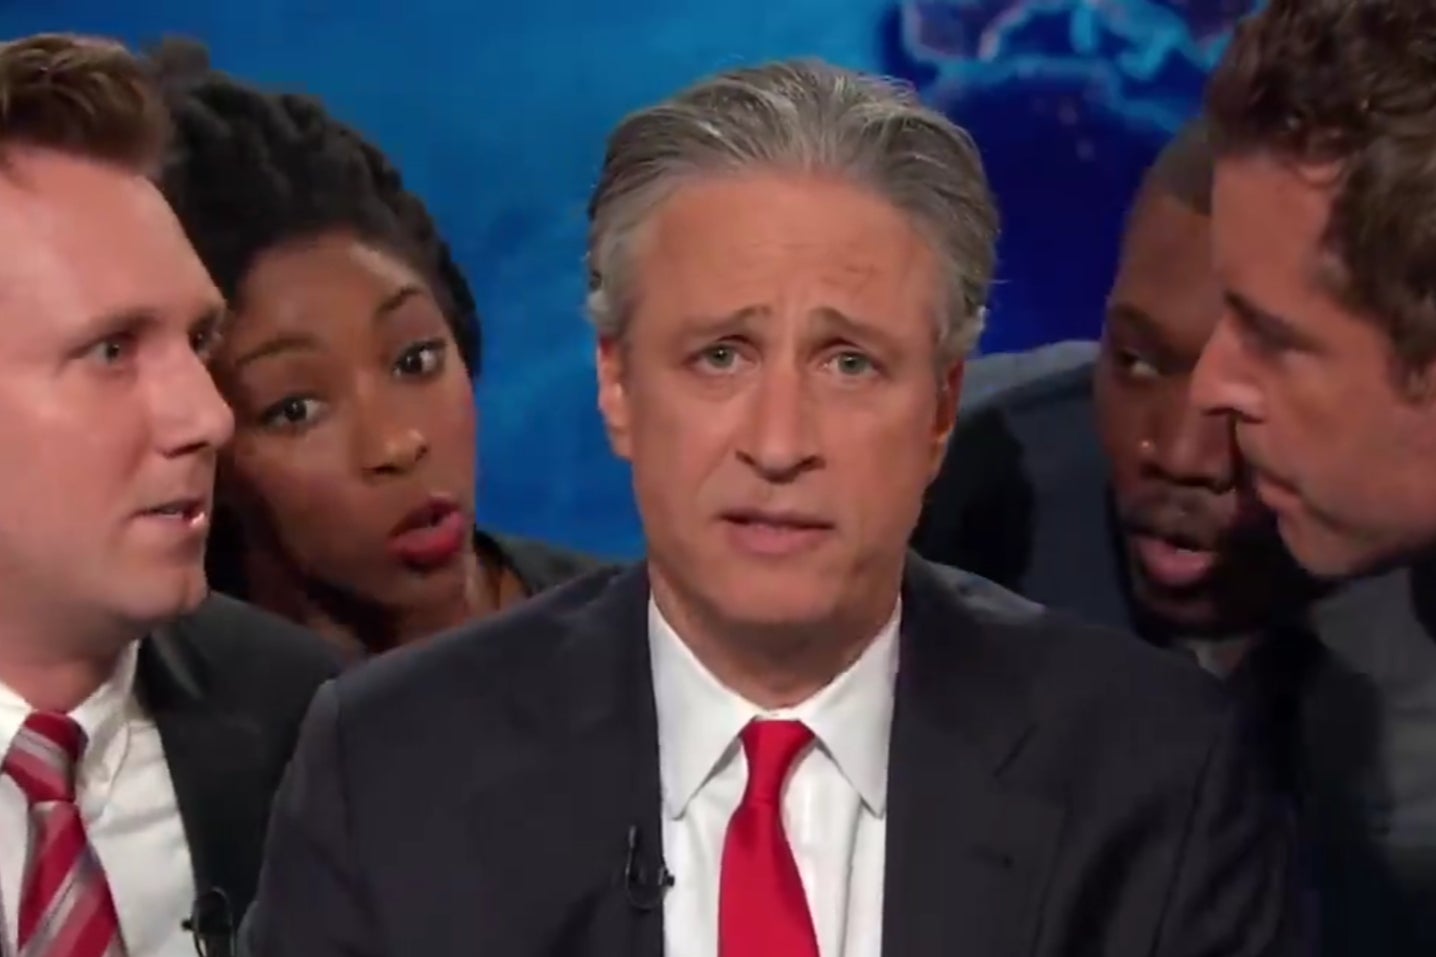 Jon Stewart appeared in a controversial Daily Show sketch from July 2014